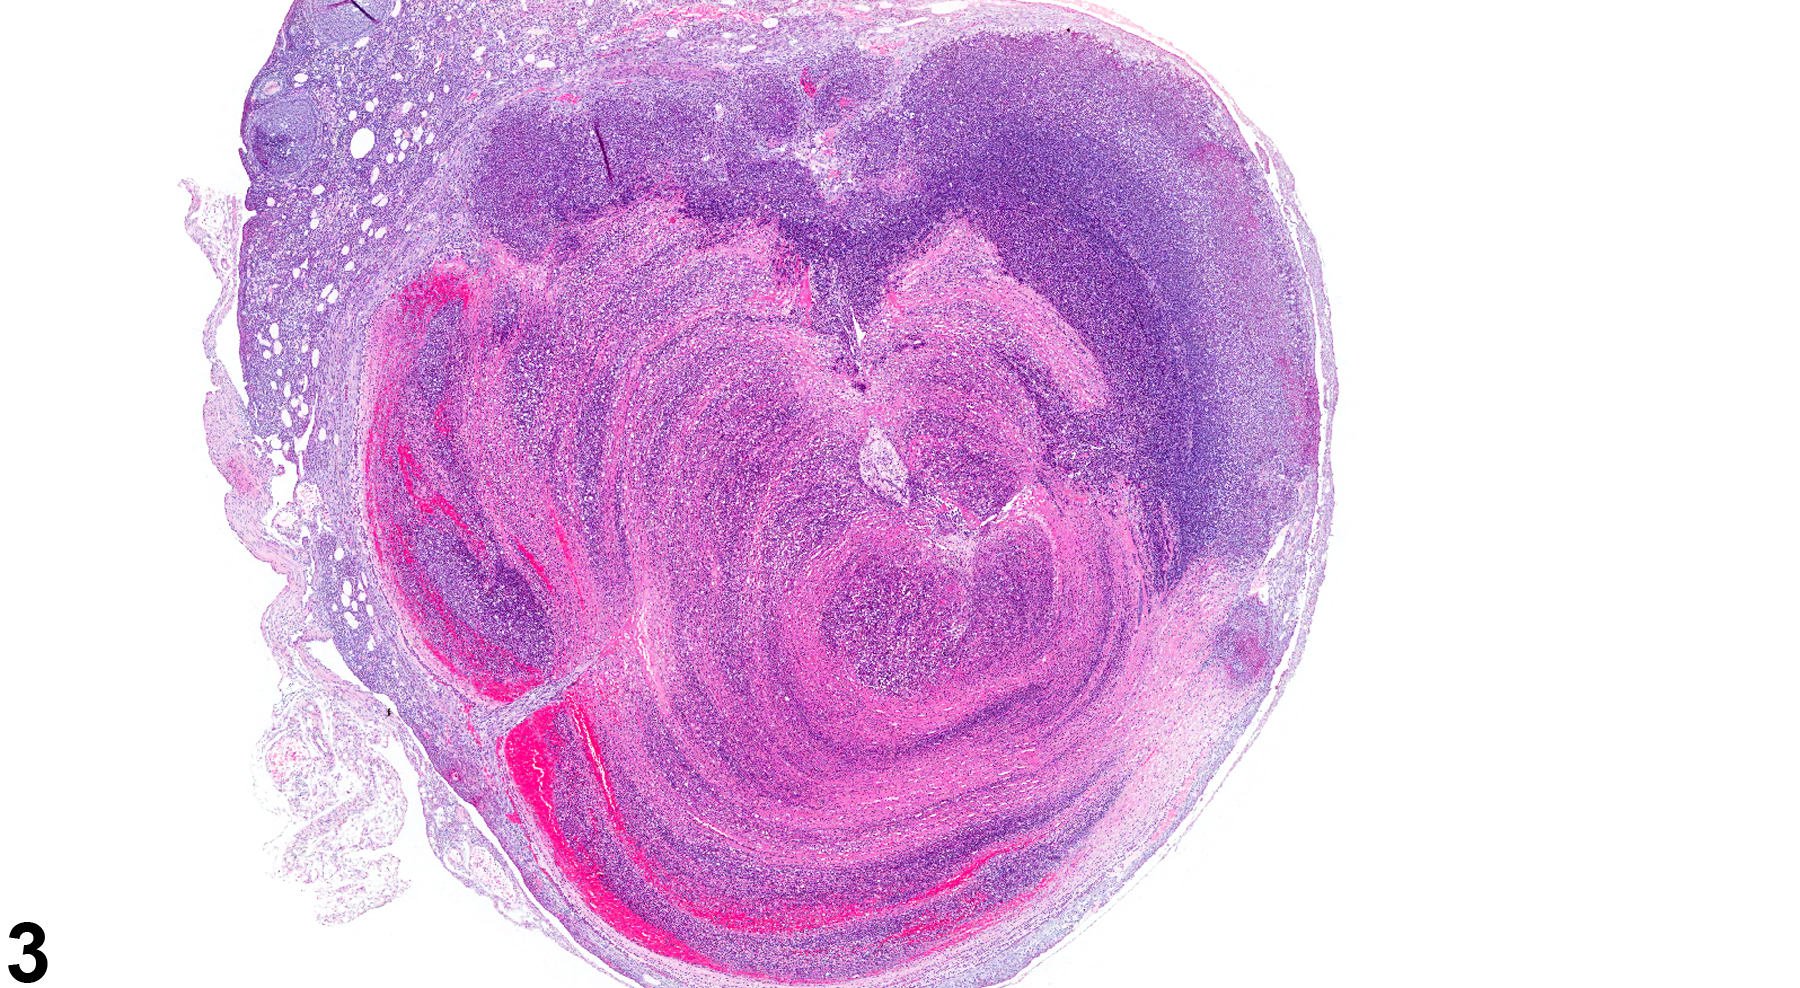 Image of inflammation, suppurative in the ovary from a female Swiss CD-1 mouse in a chronic study